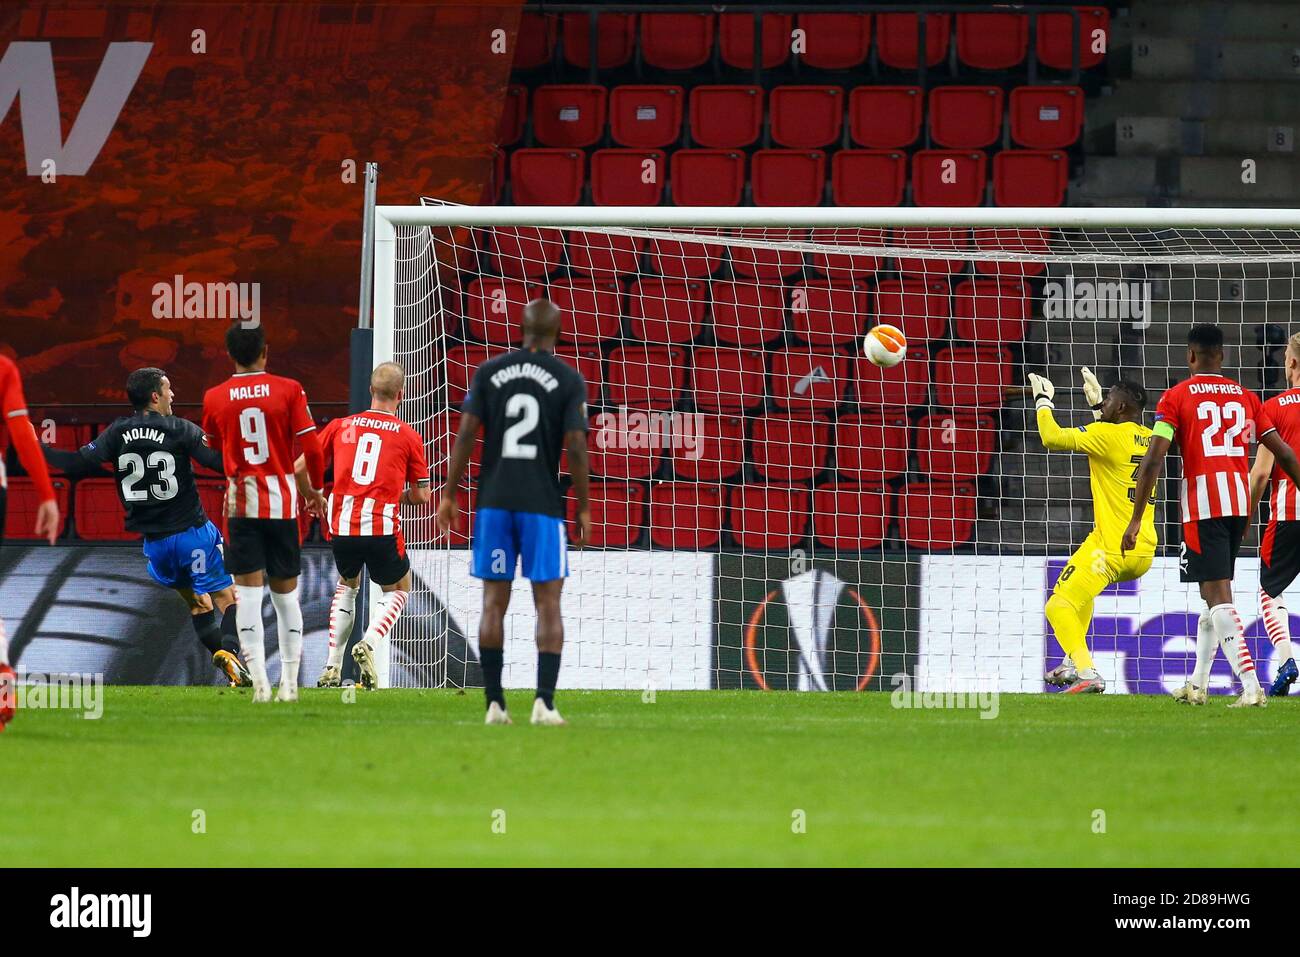 Jorge Molina of Granada (23) scores 1-1 goal during the UEFA Europa League, Group Stage, Group E football match between PSV Eindhoven and Granada CF C Stock Photo